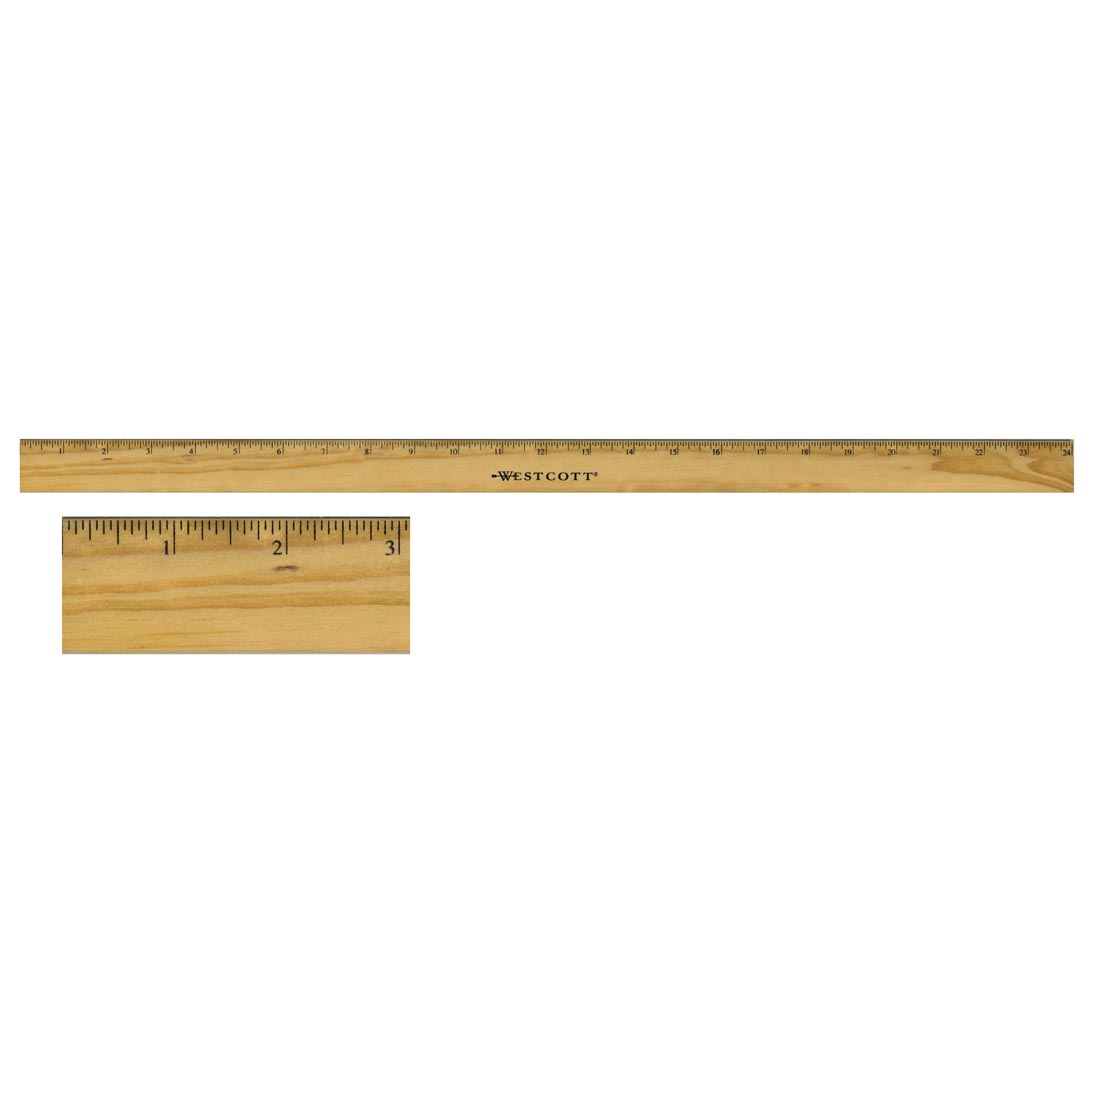 full 24" wooden ruler, plus a closeup of the first three inches to show the scale